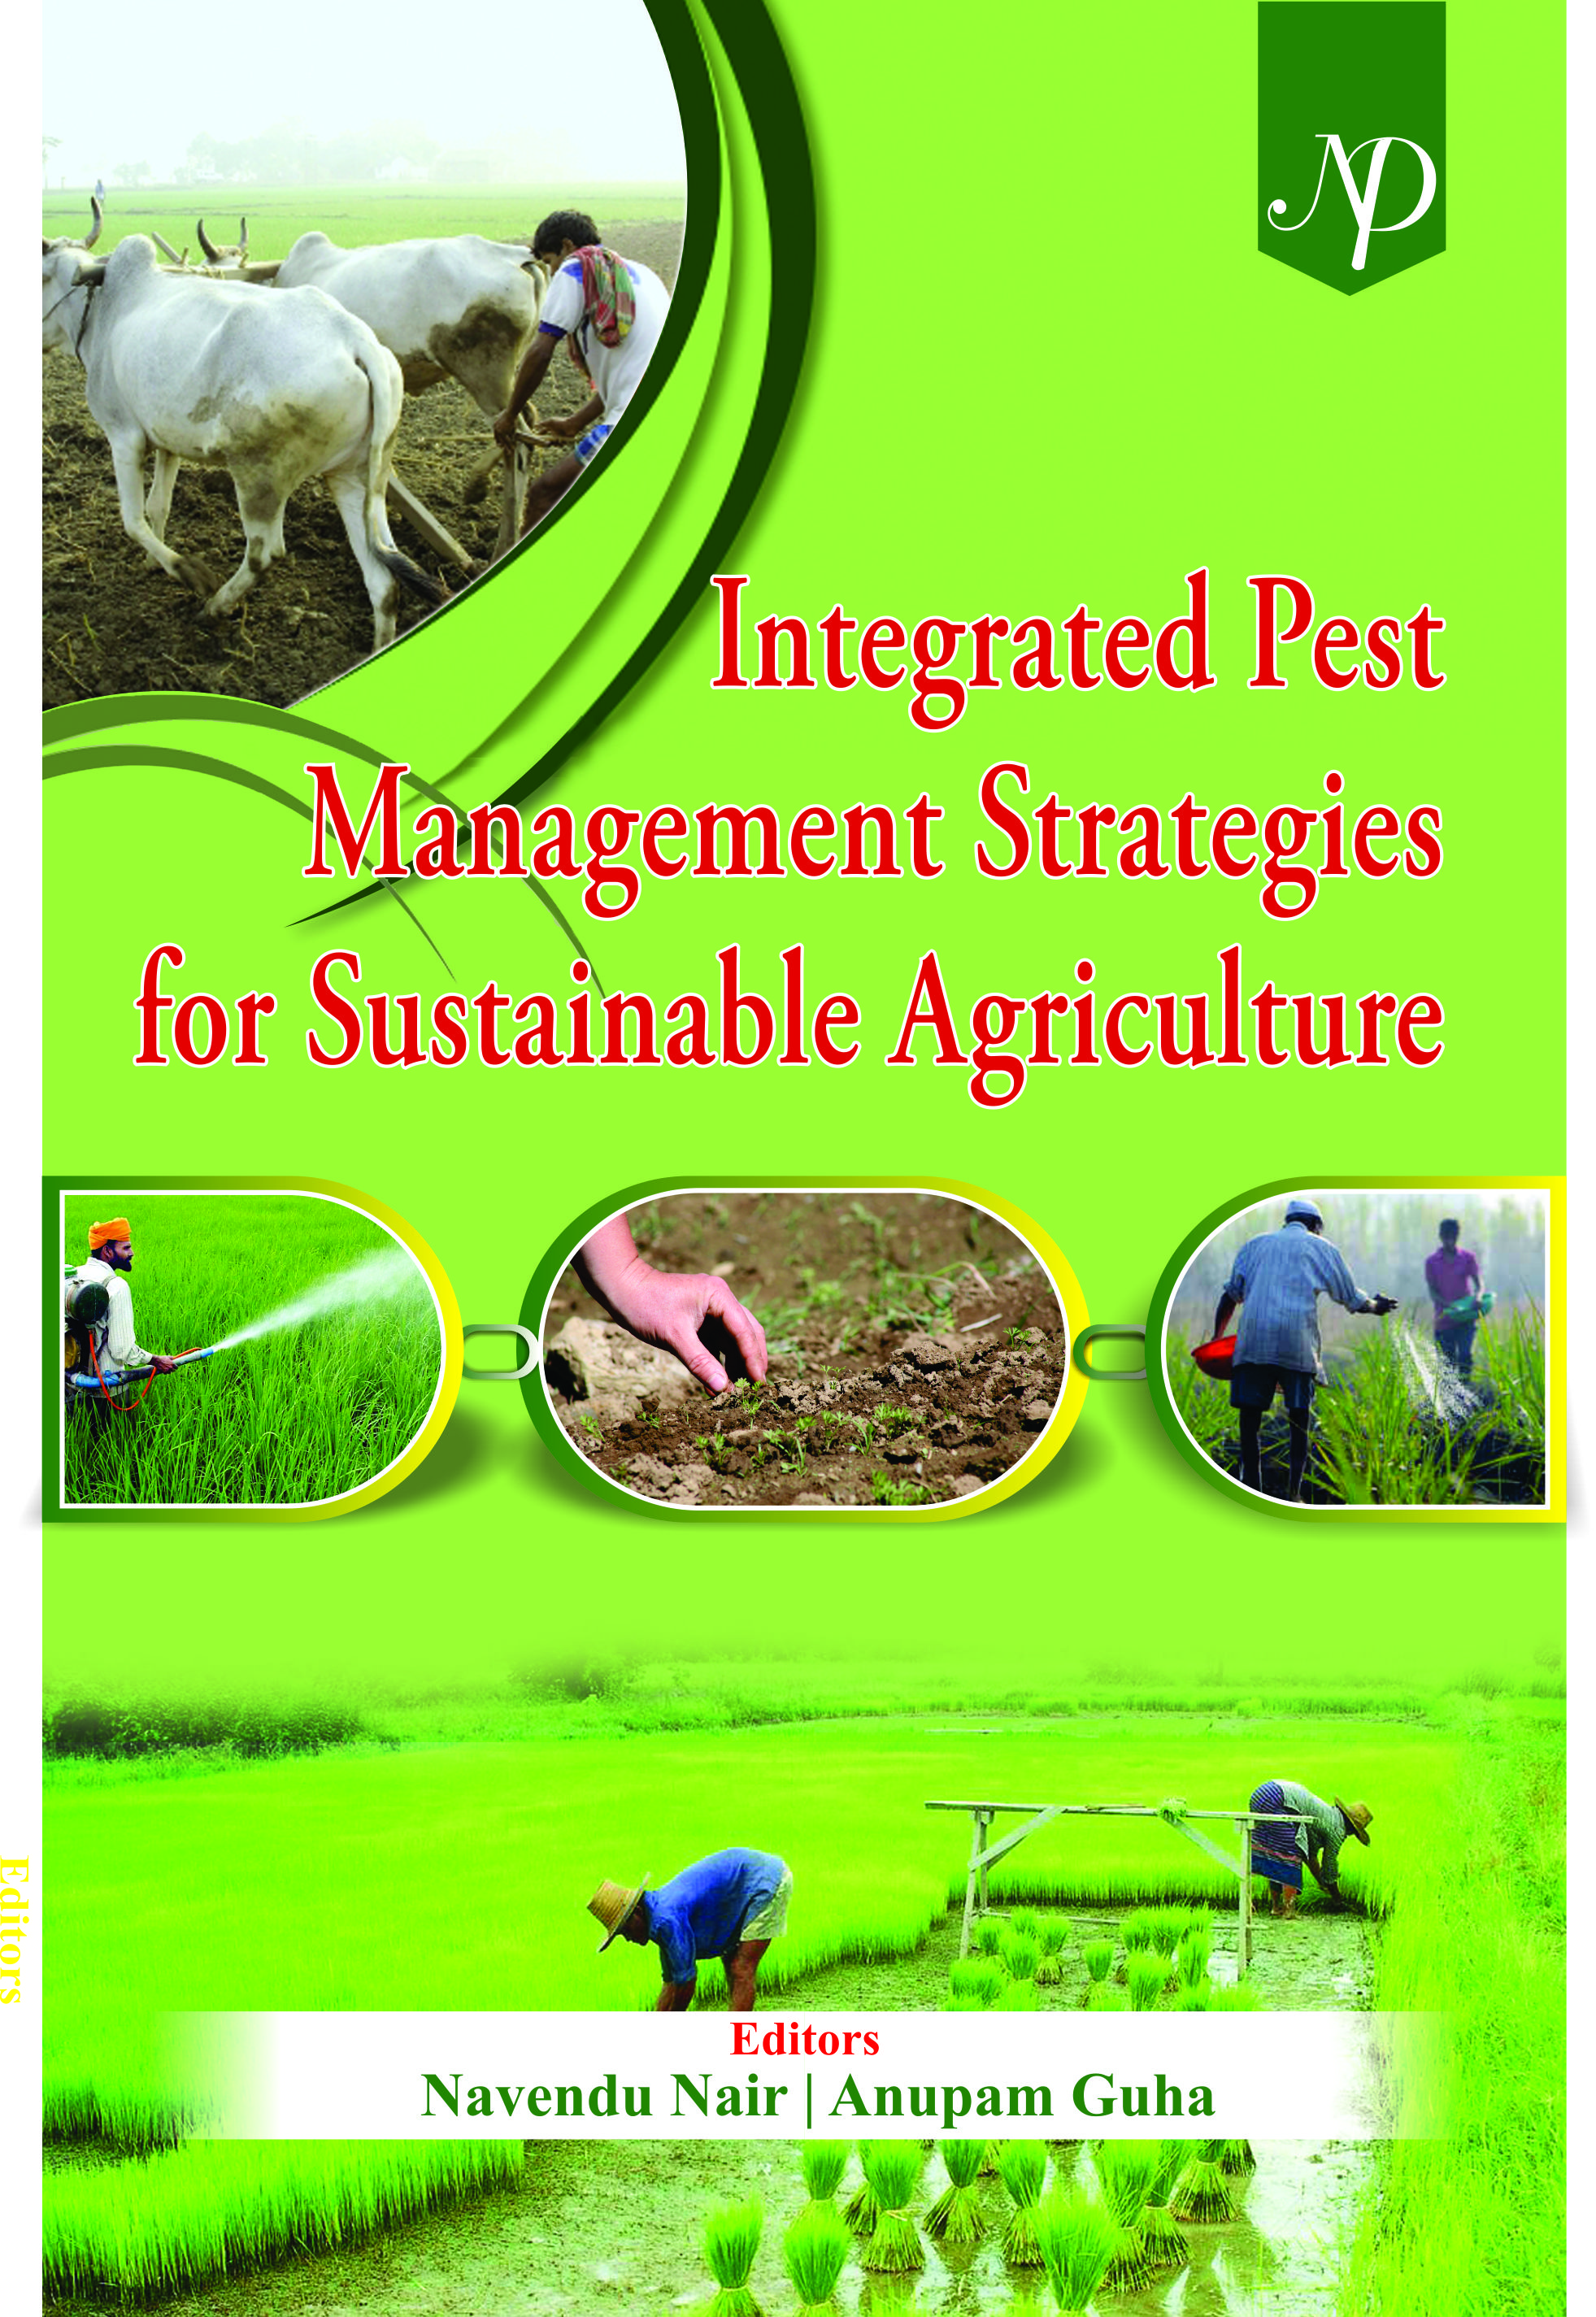 Integrated Pest Management Strategies for Sustainable Agriculture